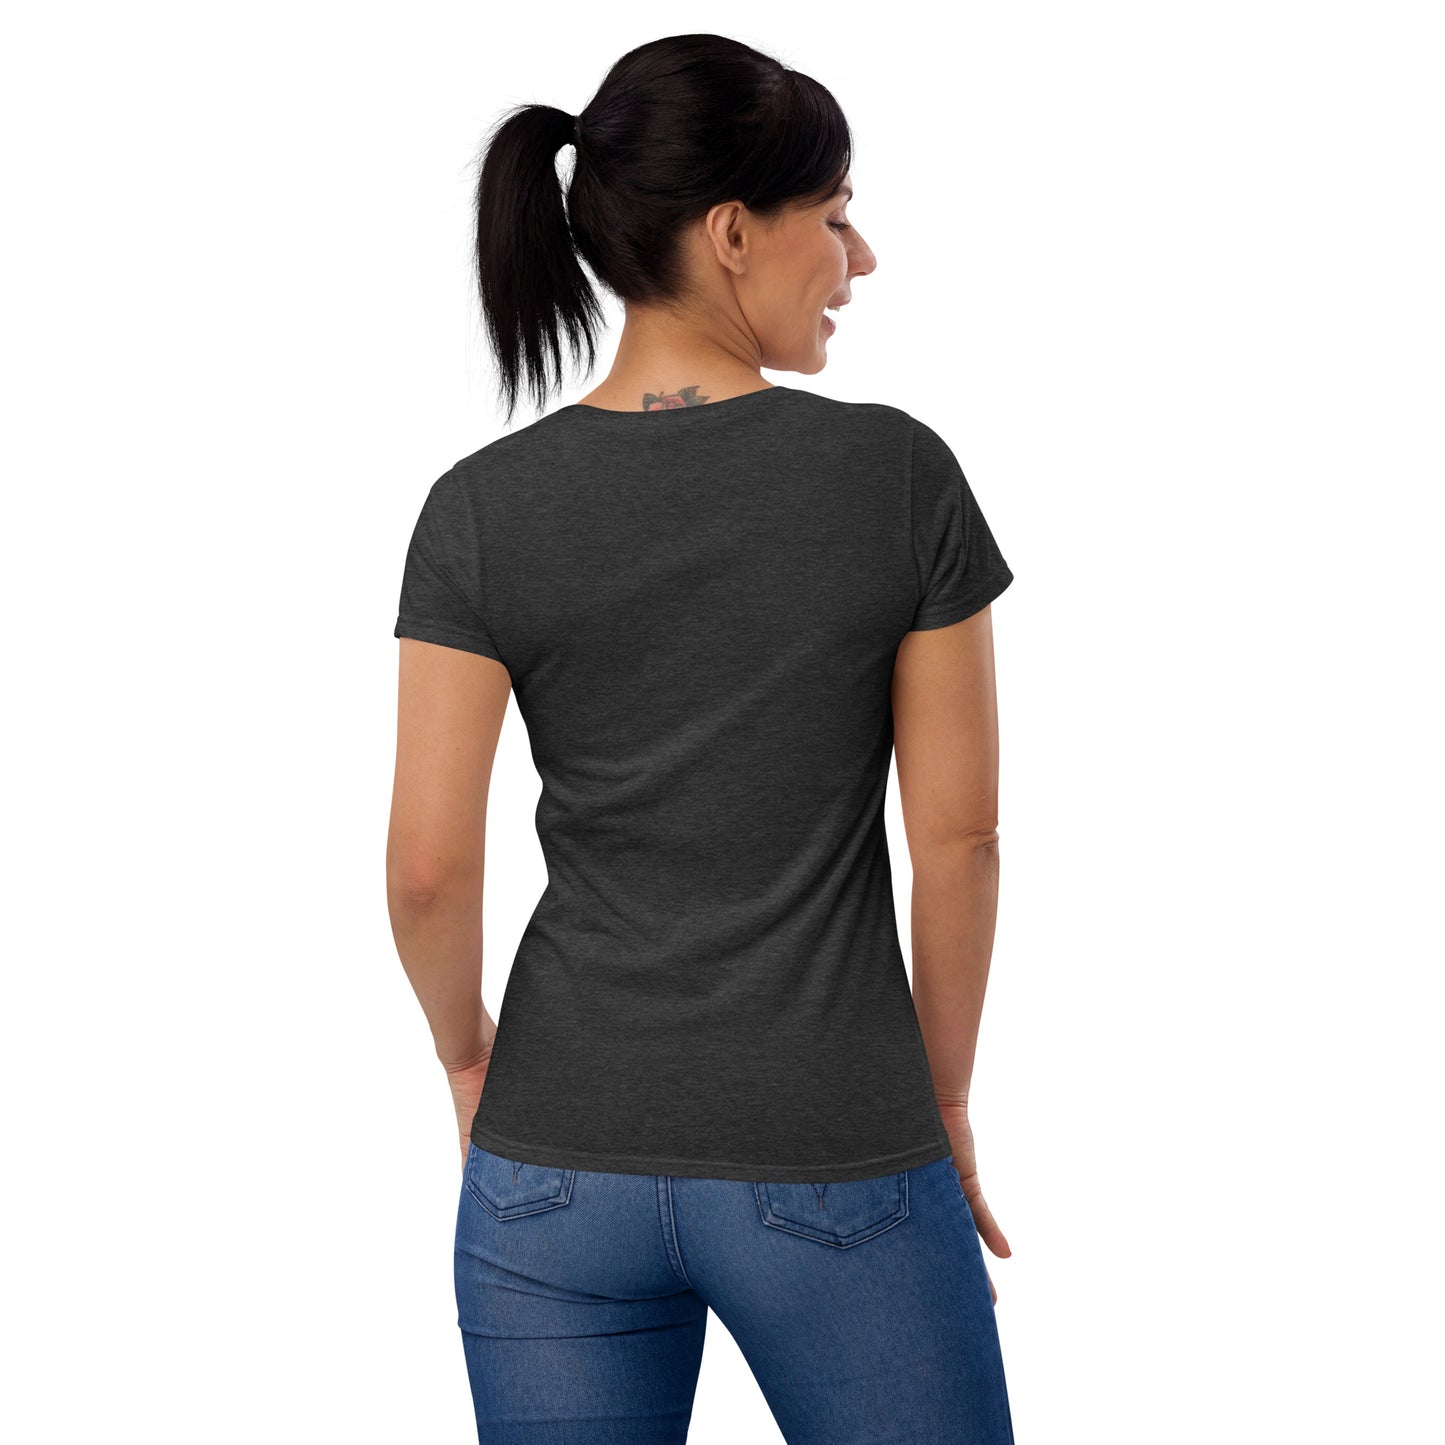 If only you knew - Women's T-shirt